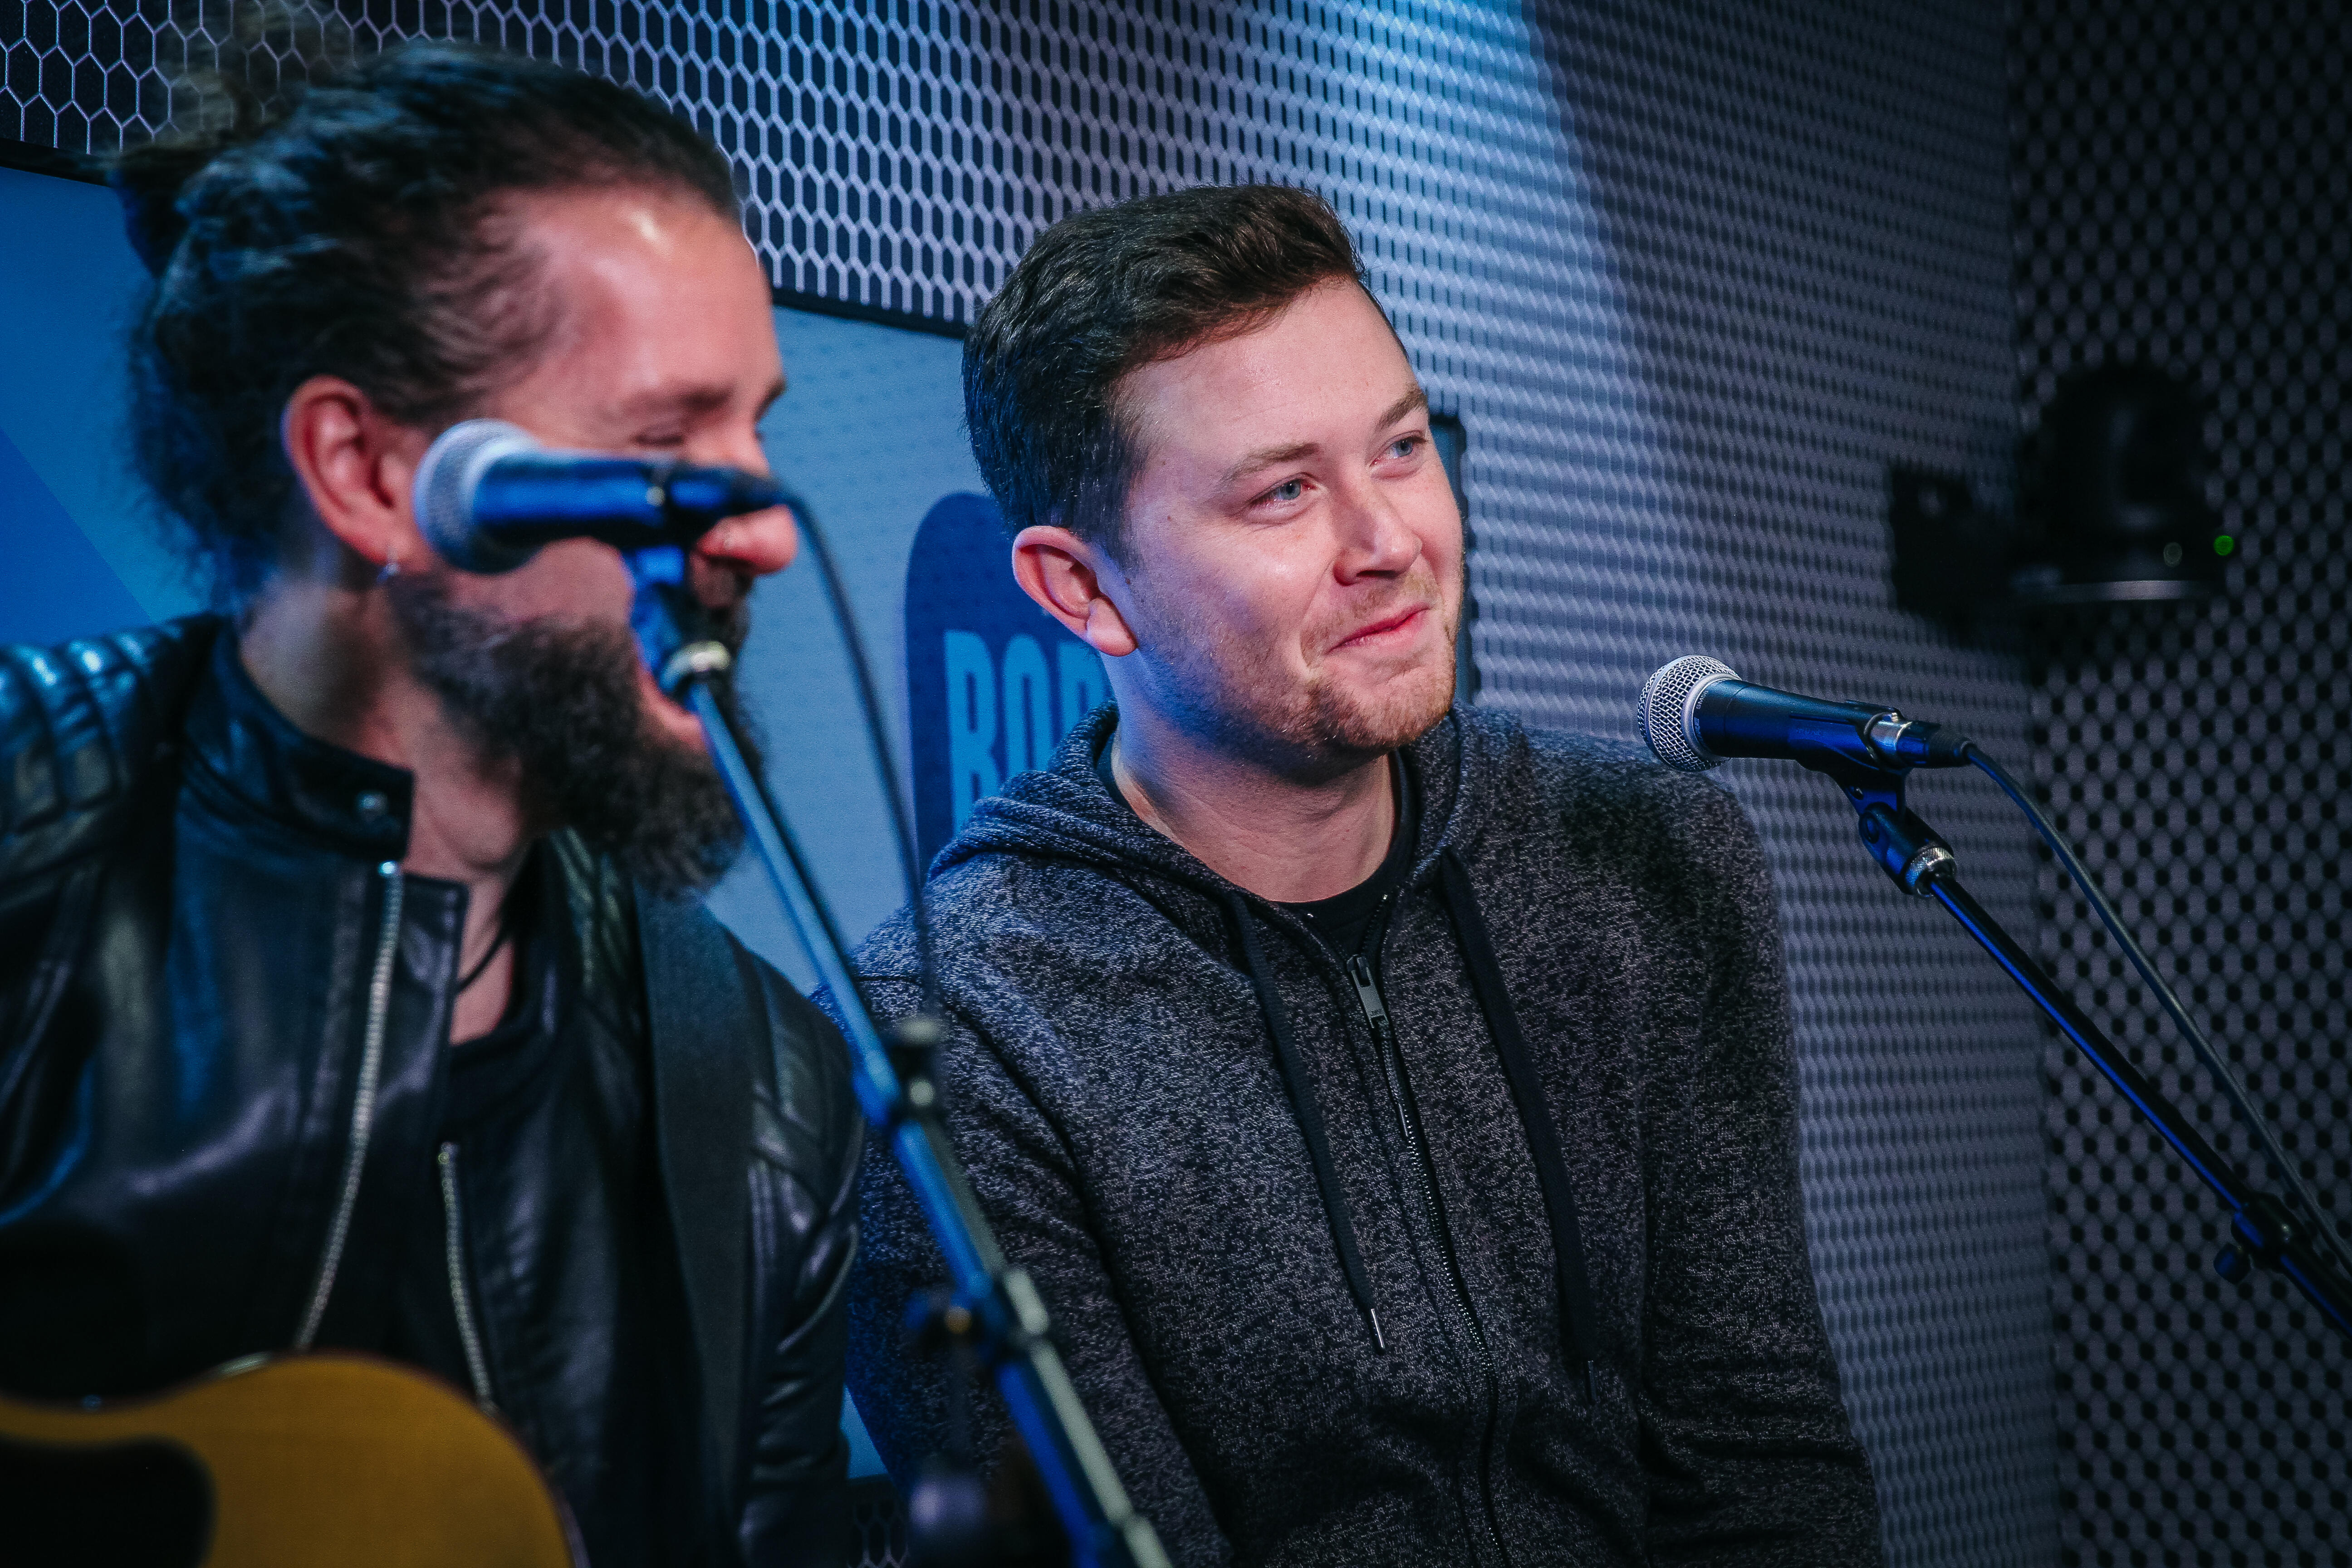 StJude Radiothon:Scotty McCreery Performs Cover Of Garth Brooks "The Dance" - Thumbnail Image